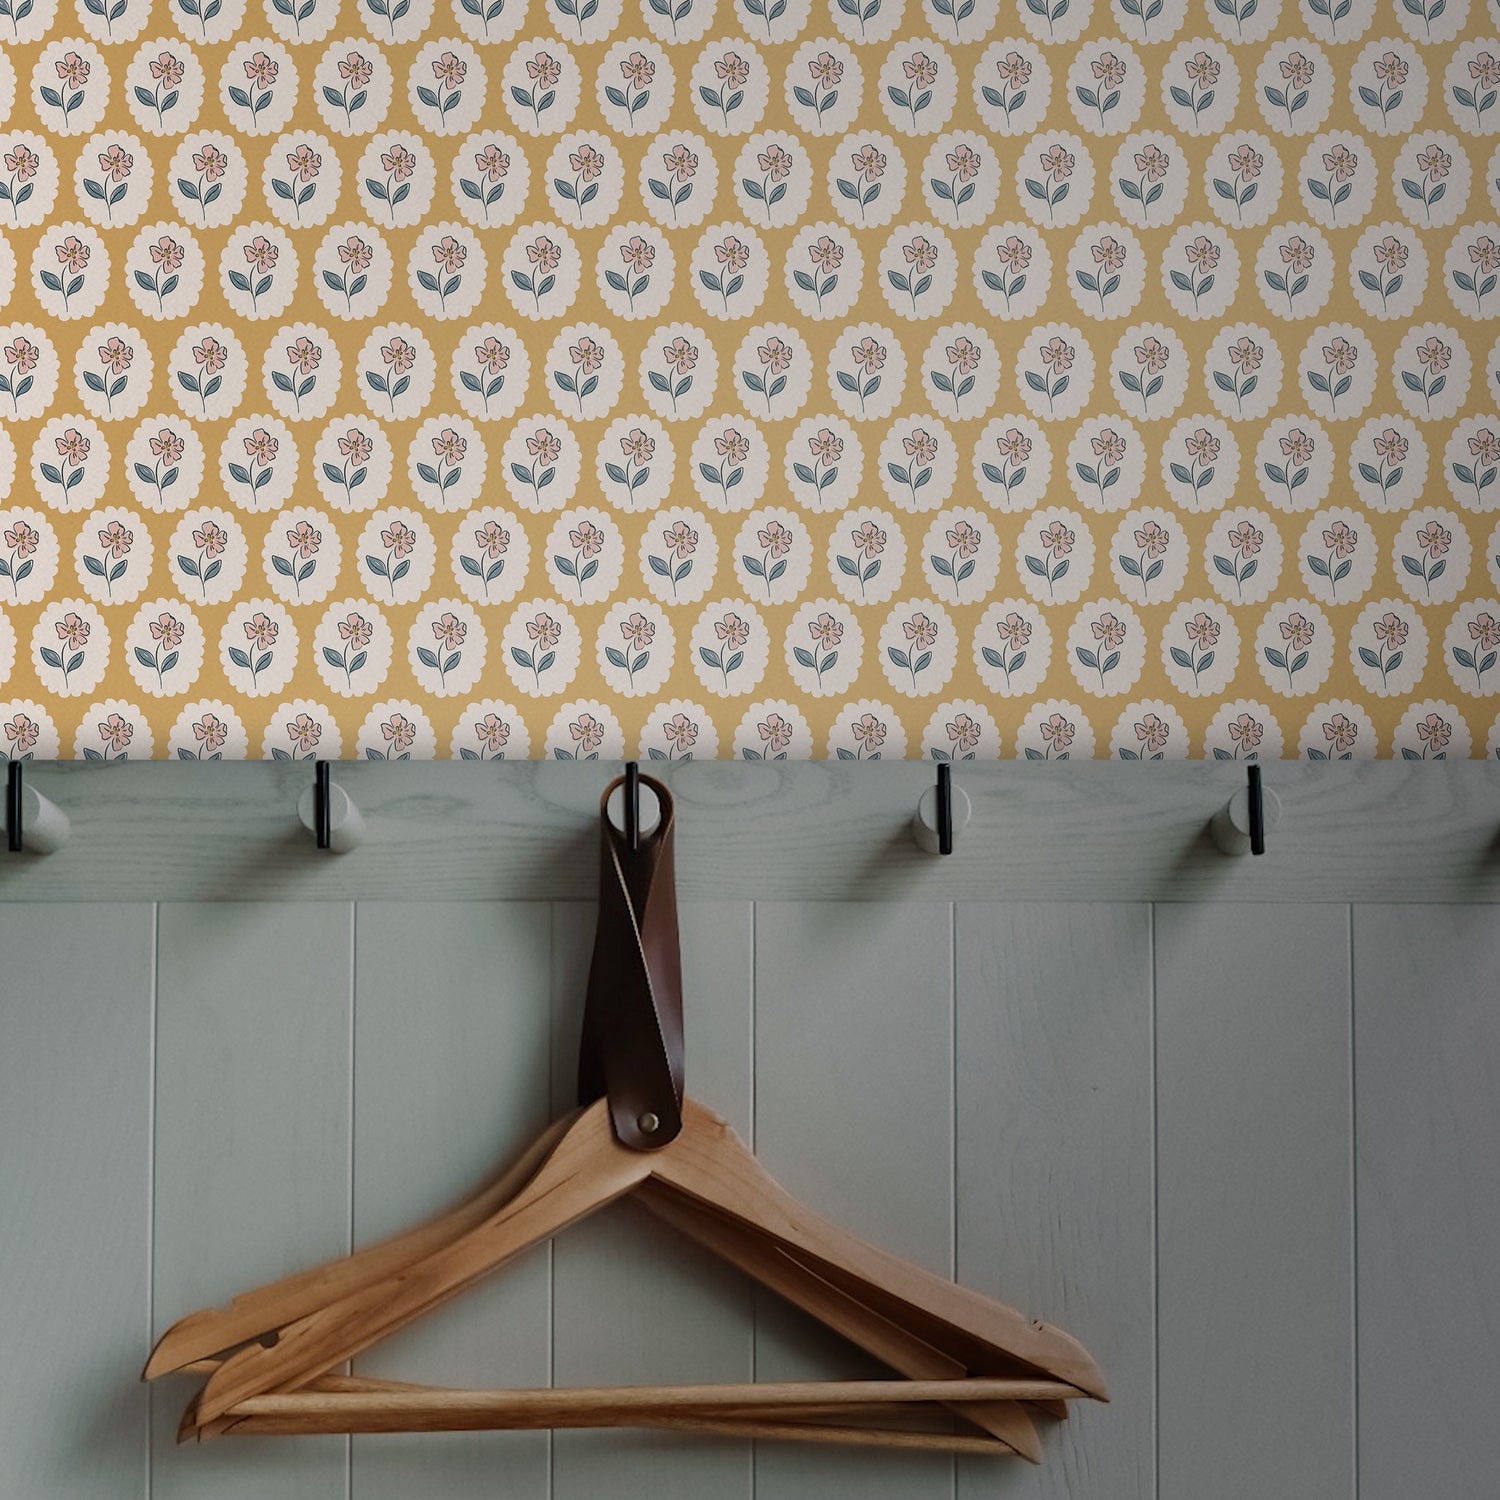 Mudroom featuring Dancing Petals Peel and Stick, Removable Wallpaper in Ochre yellow